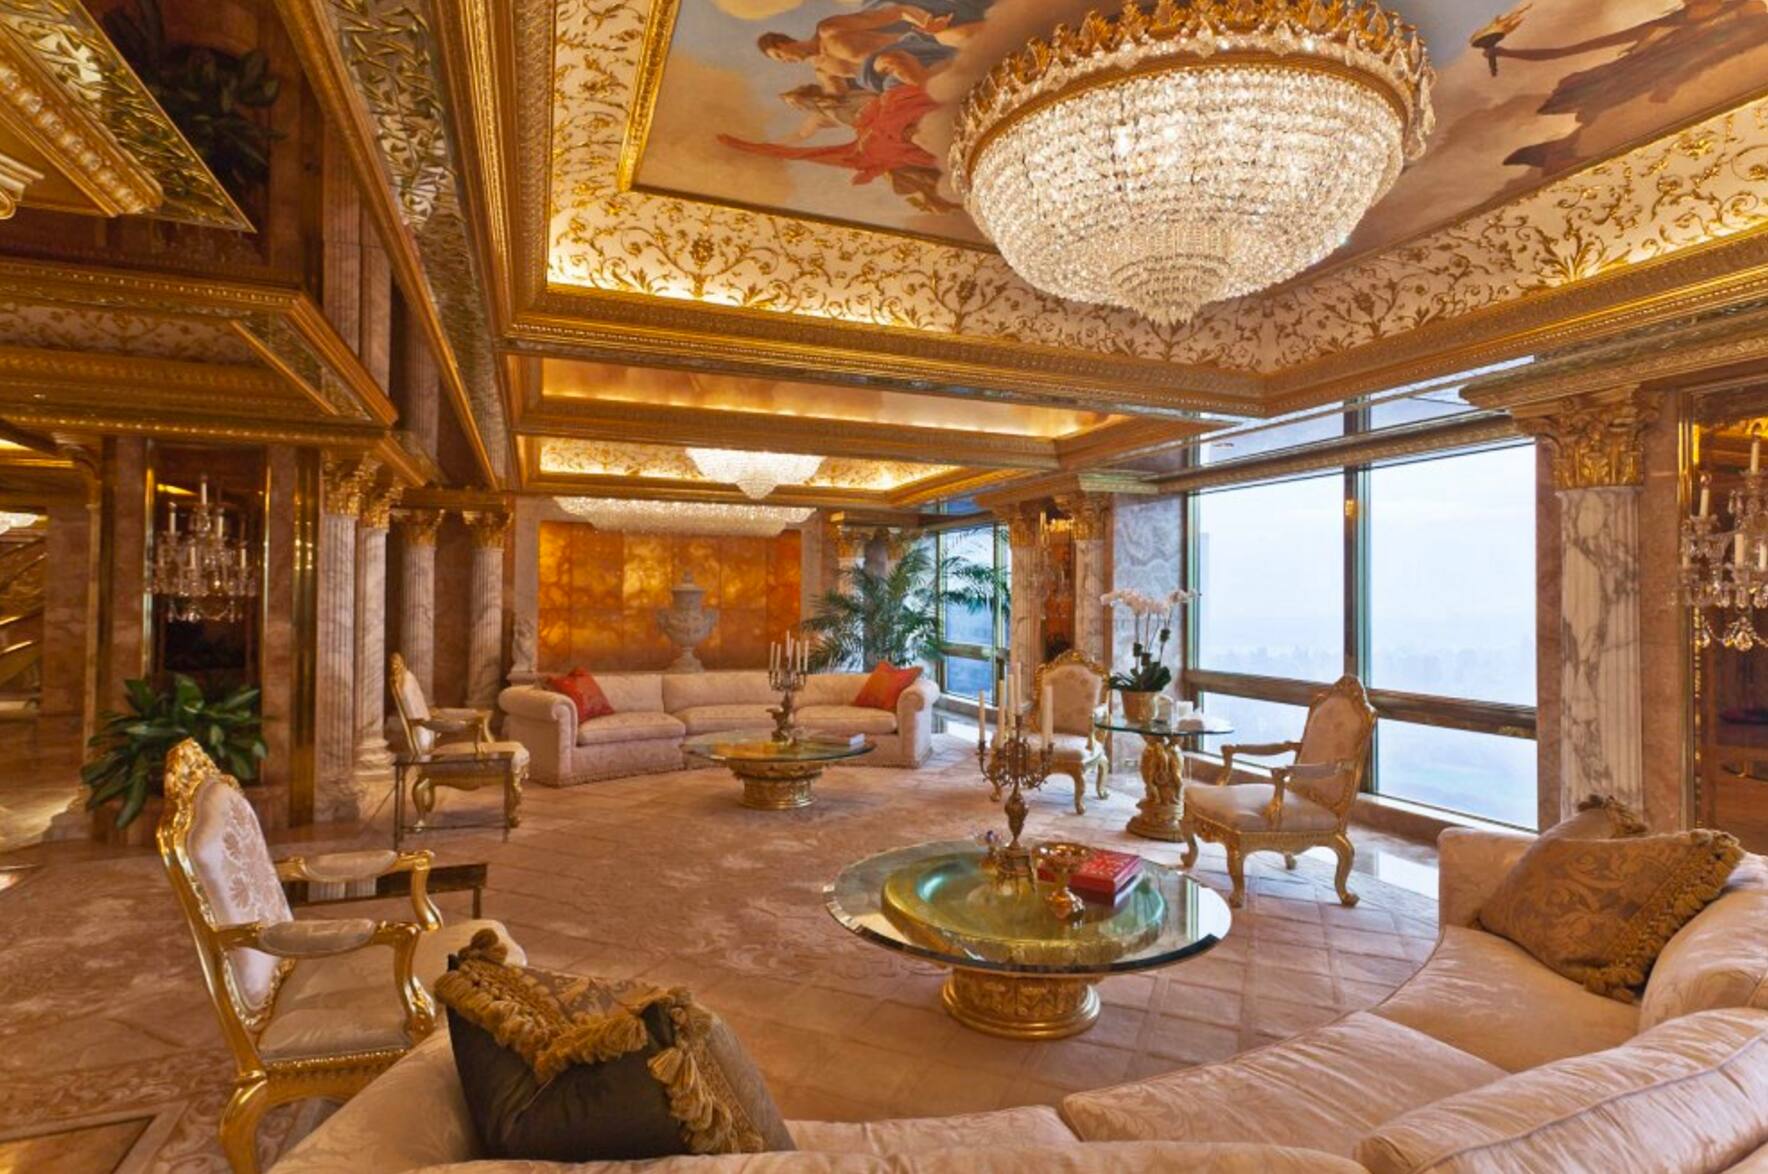 White House pictures Donald Trump Trump tower penthouse